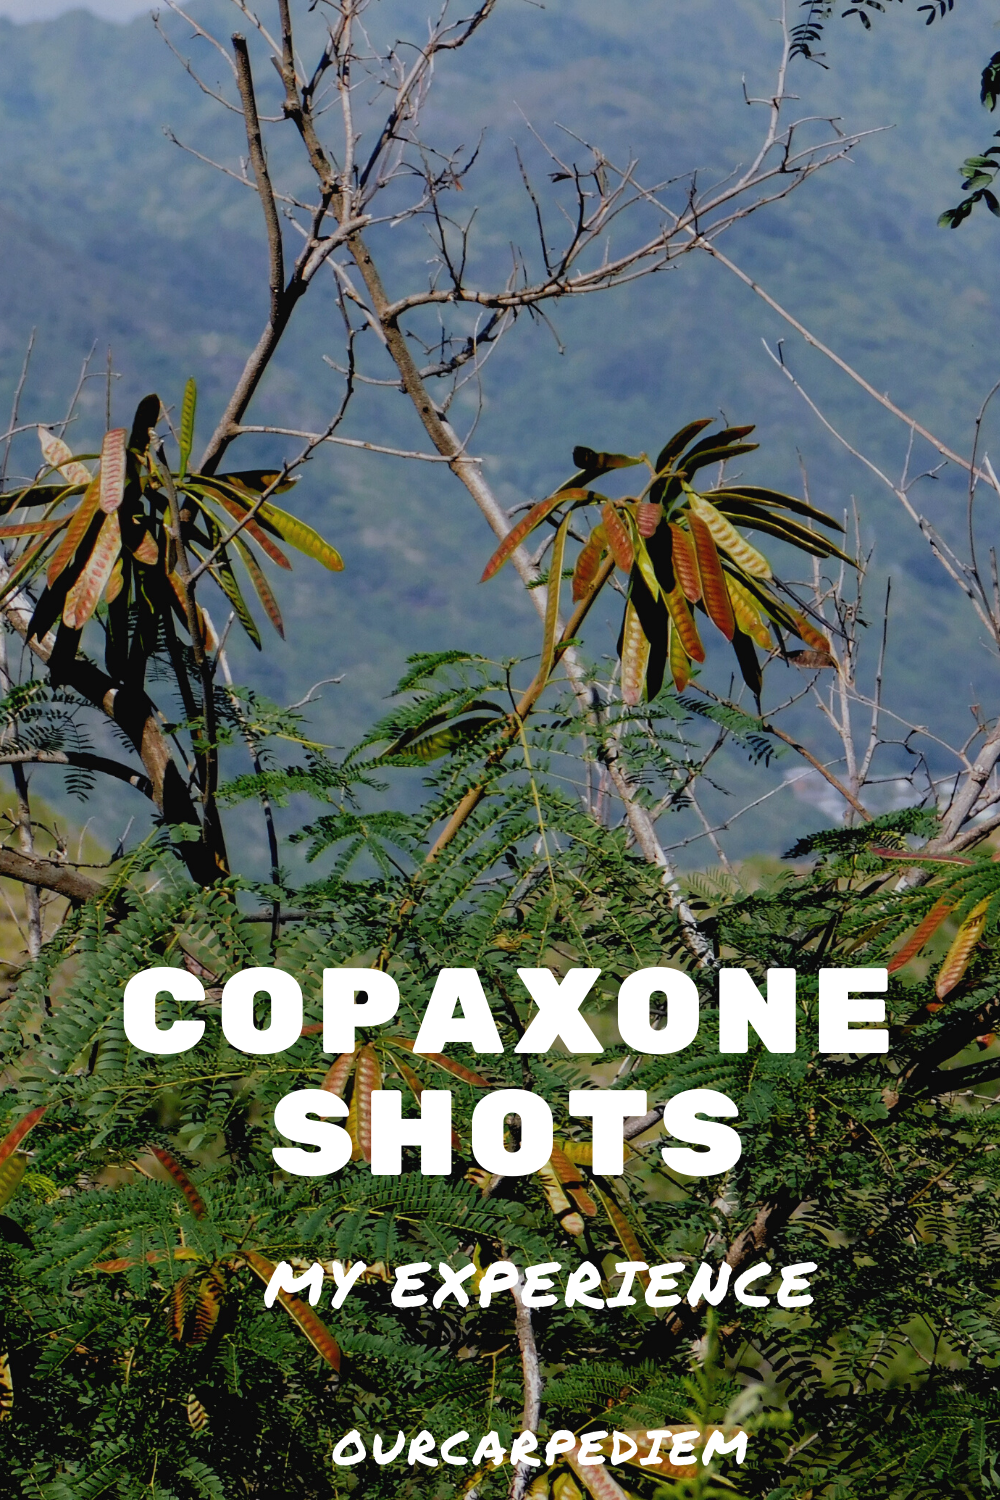 LivingWithMS: How To Make Your Copaxone Shots An Effective Experience